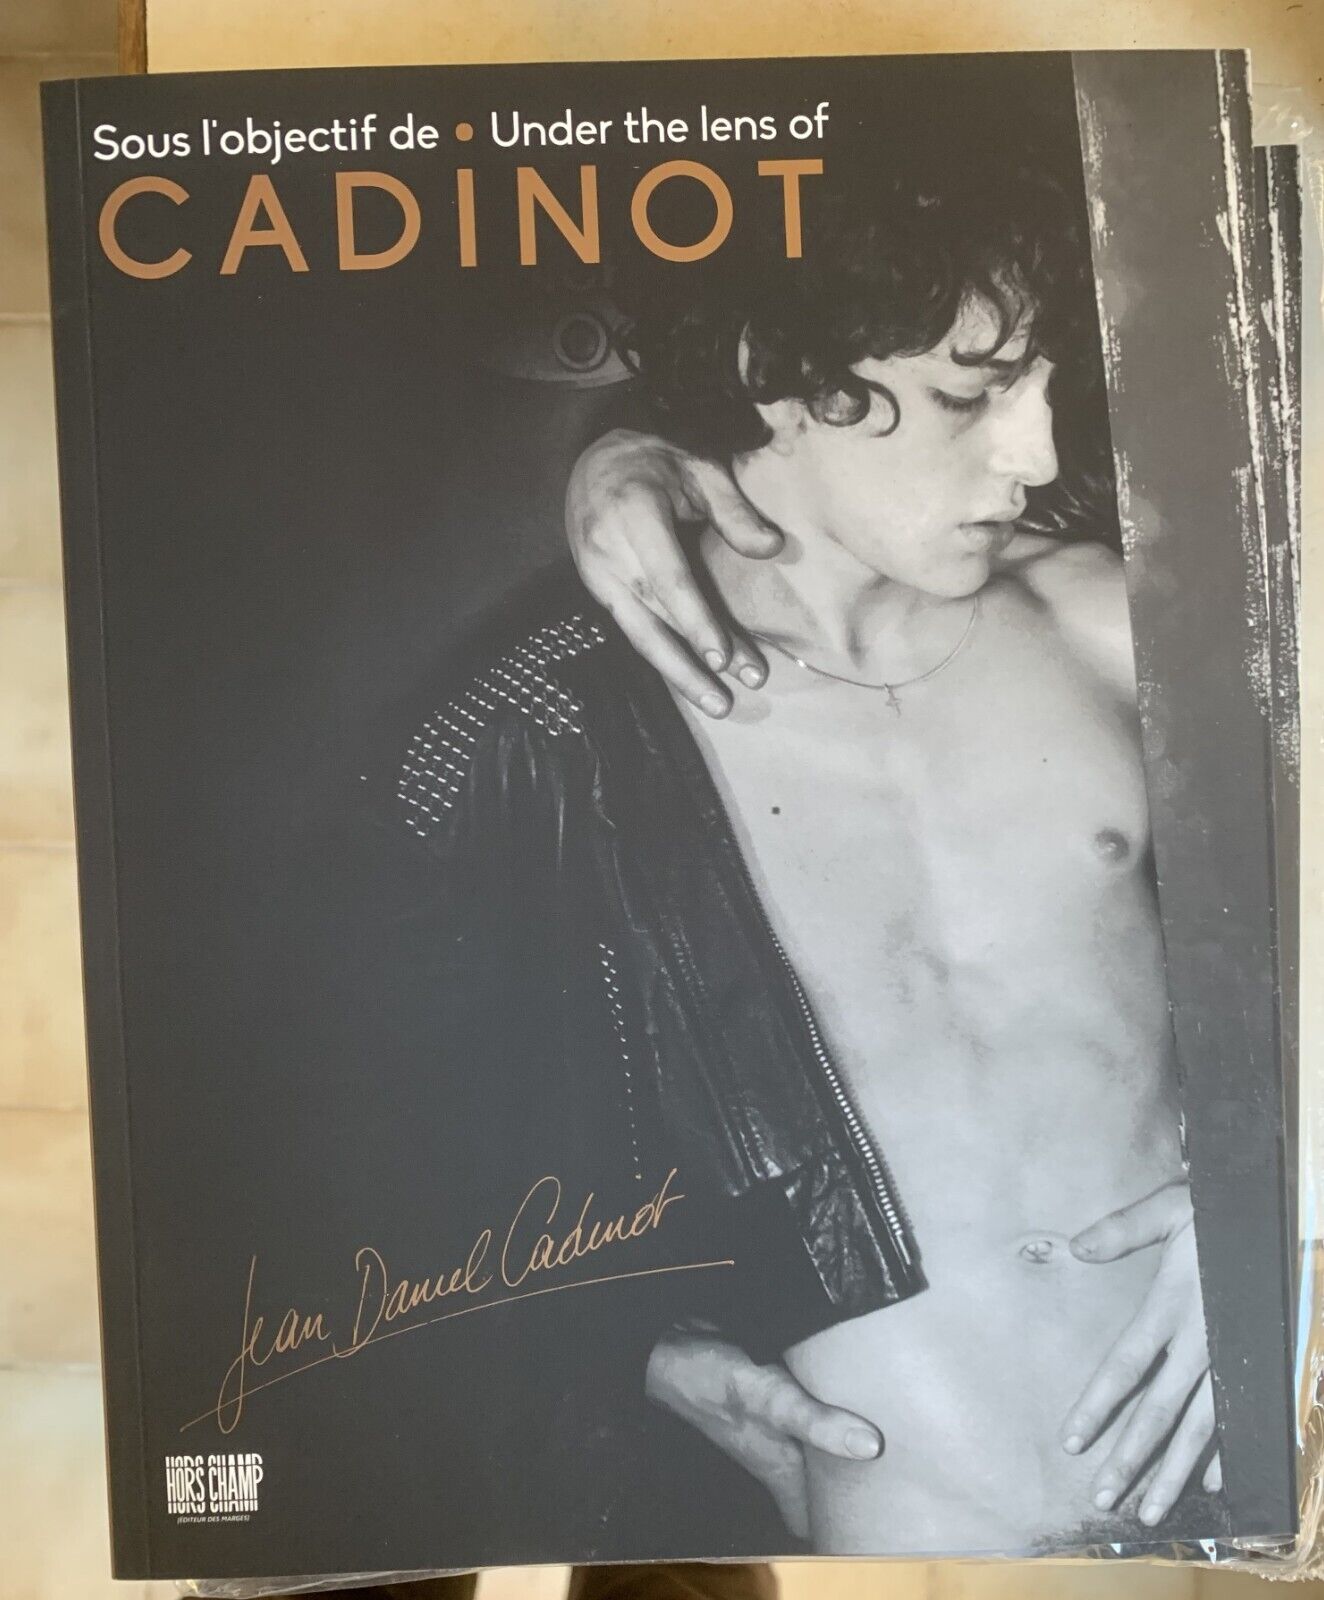 gay interest book under the lens of / under the lens of Jean-Daniel Cadinot